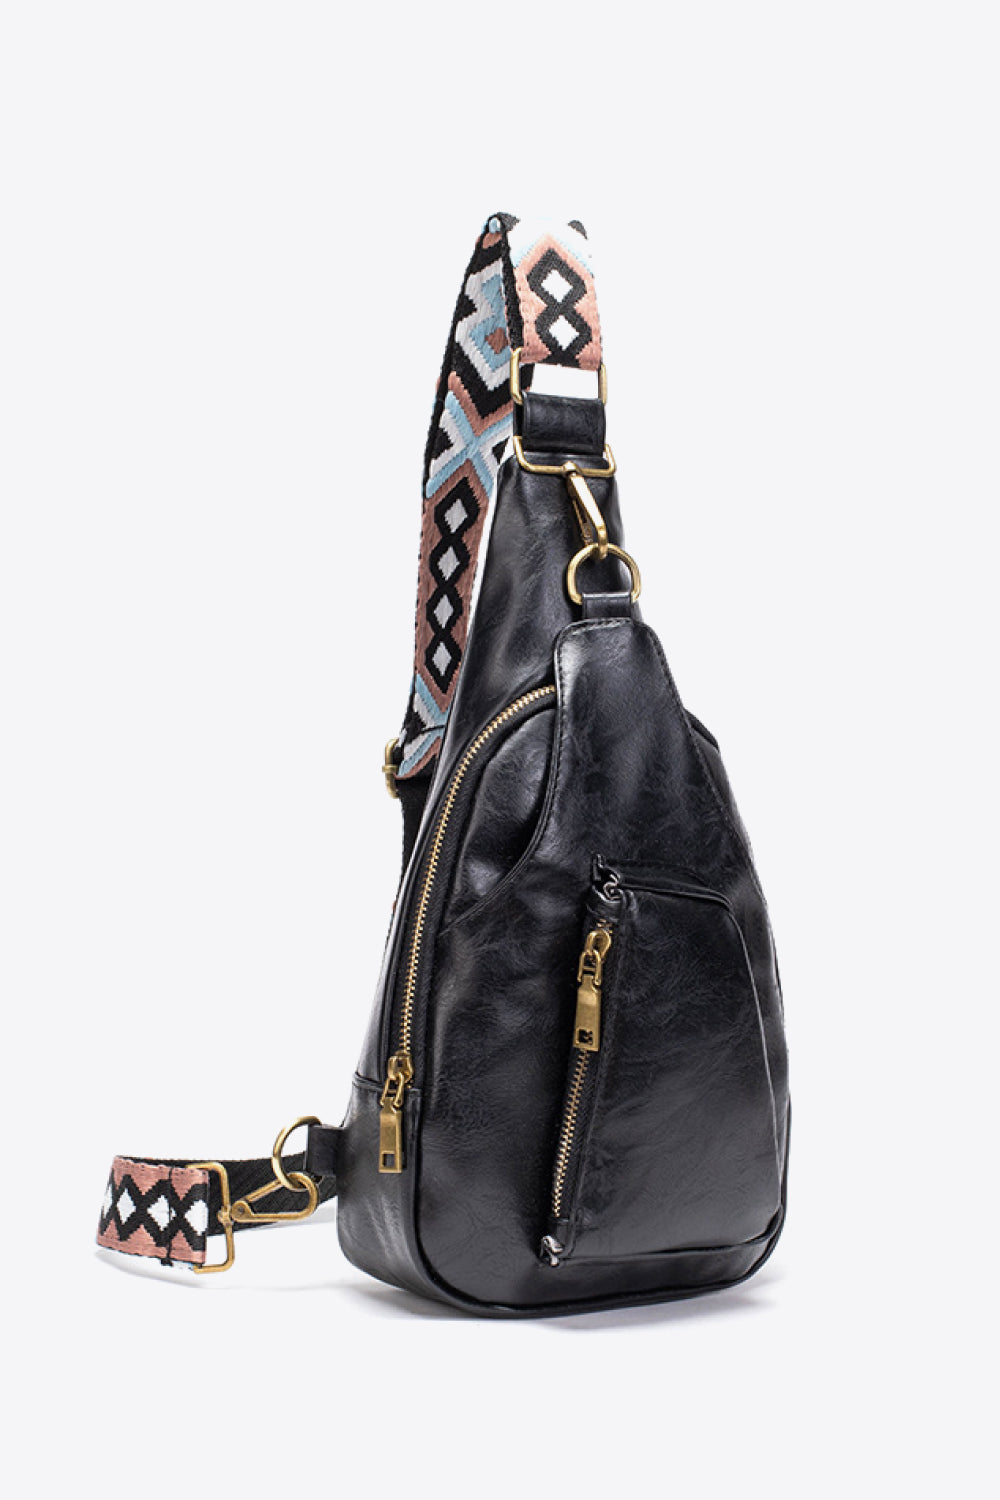 All The Feels PU Leather Sling Bag - AllIn Computer